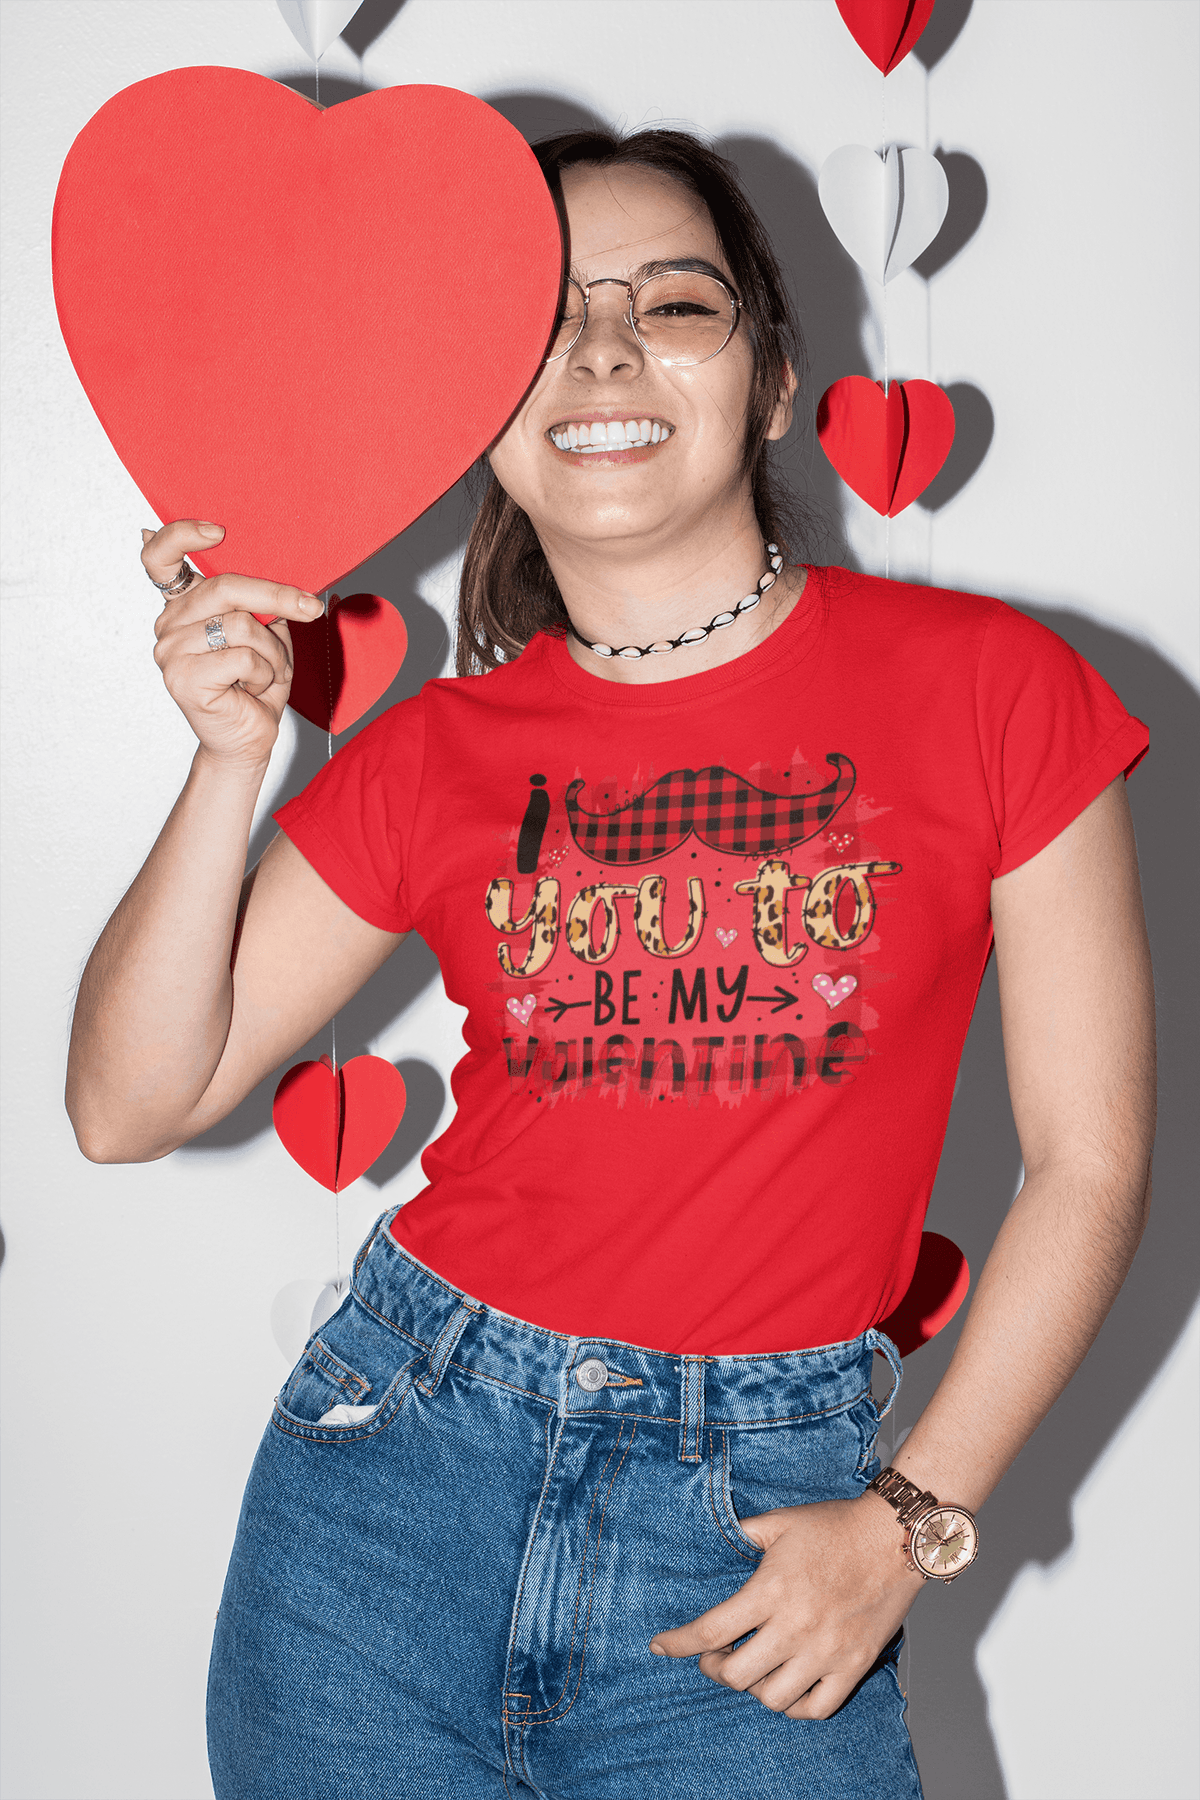 YOU TO BE MY VALENTINE T-shirt-Regular Fit Tee-StylinArts